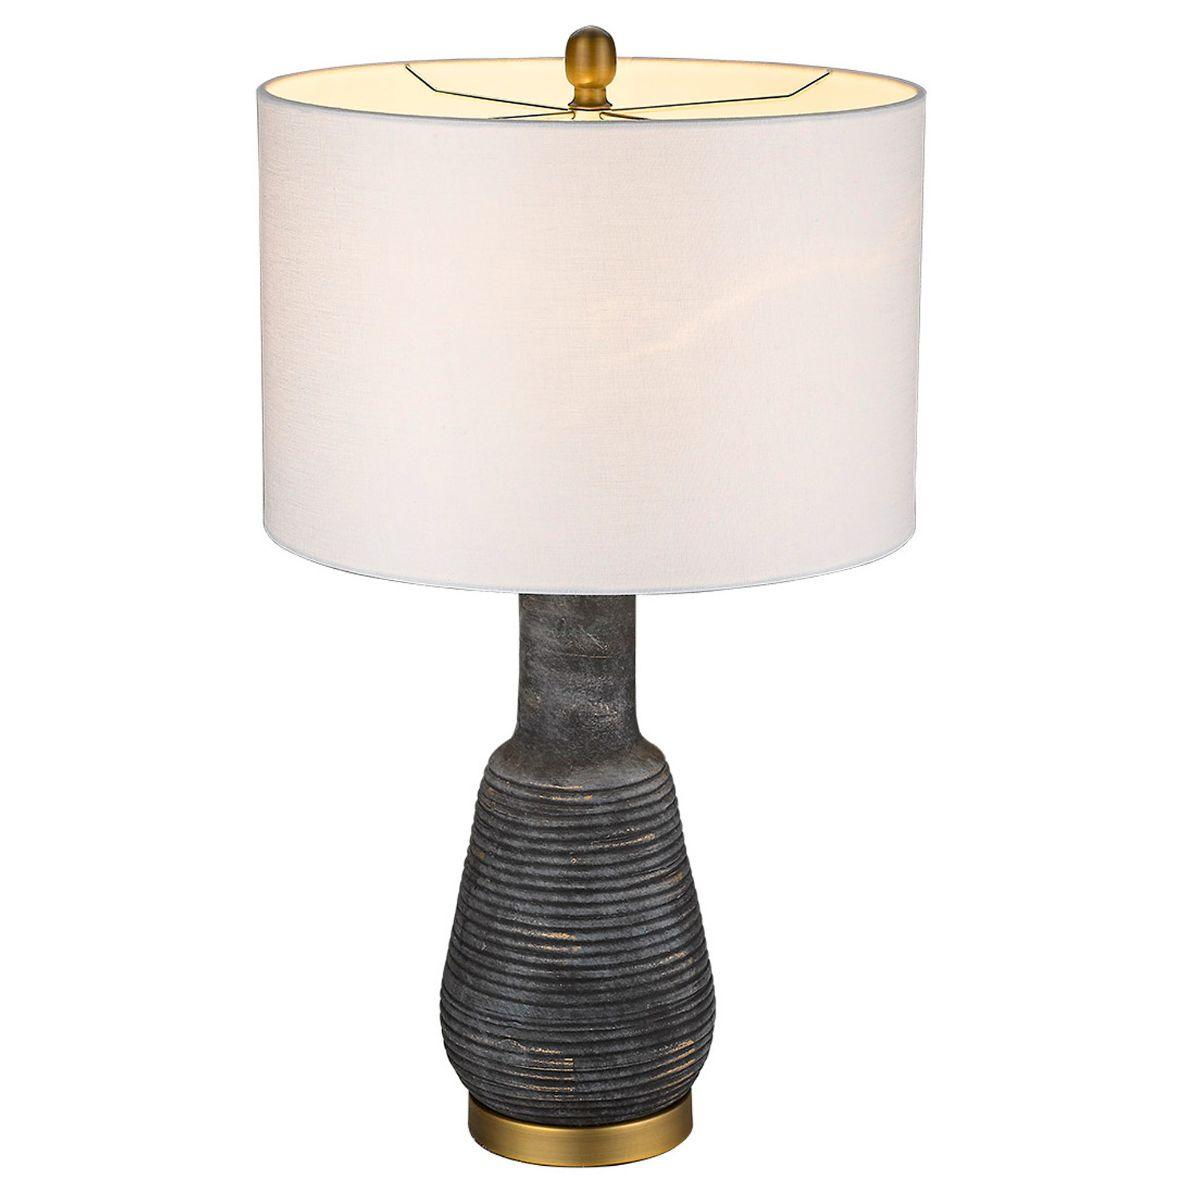 Trend Home 1 Light Table Lamp Rustic Iron Ceramic Body and Brass Accents